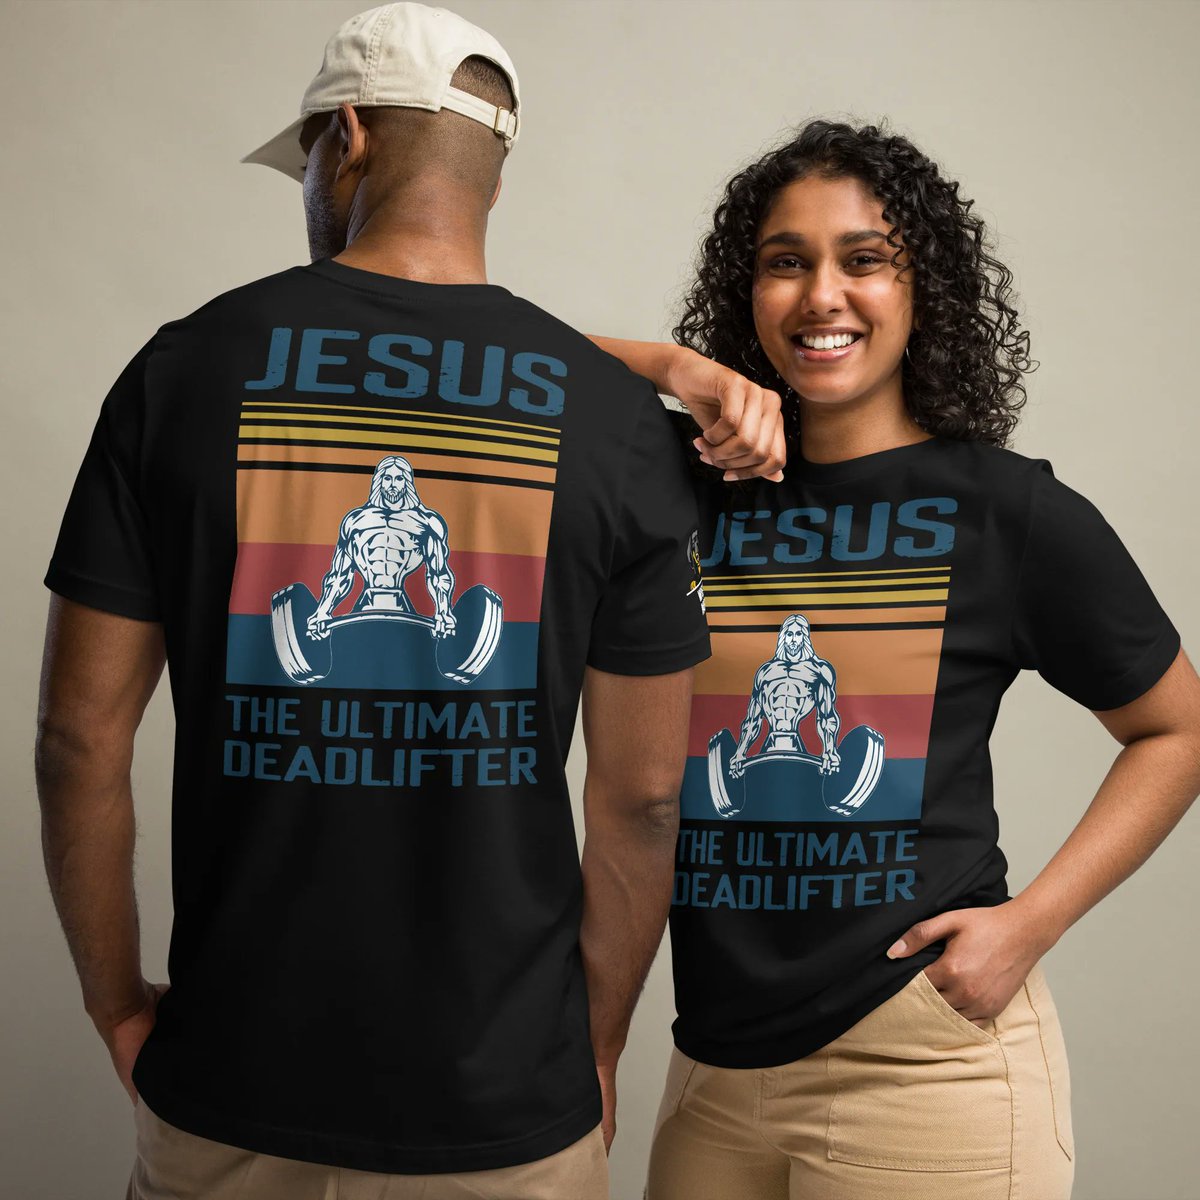 Celebrate Your Faith in Style! ✝️🇺🇸 Our #ChristianFashion unisex tees are proudly #MadeInUSA for moments of pride, prayer, and peace. Be part of the movement combining unity, faith & fashion. 🕊️ 

Shop now! ➡️ wienersquadmedia.com/product-catego… 

#WearYourFaith #UnisexTees